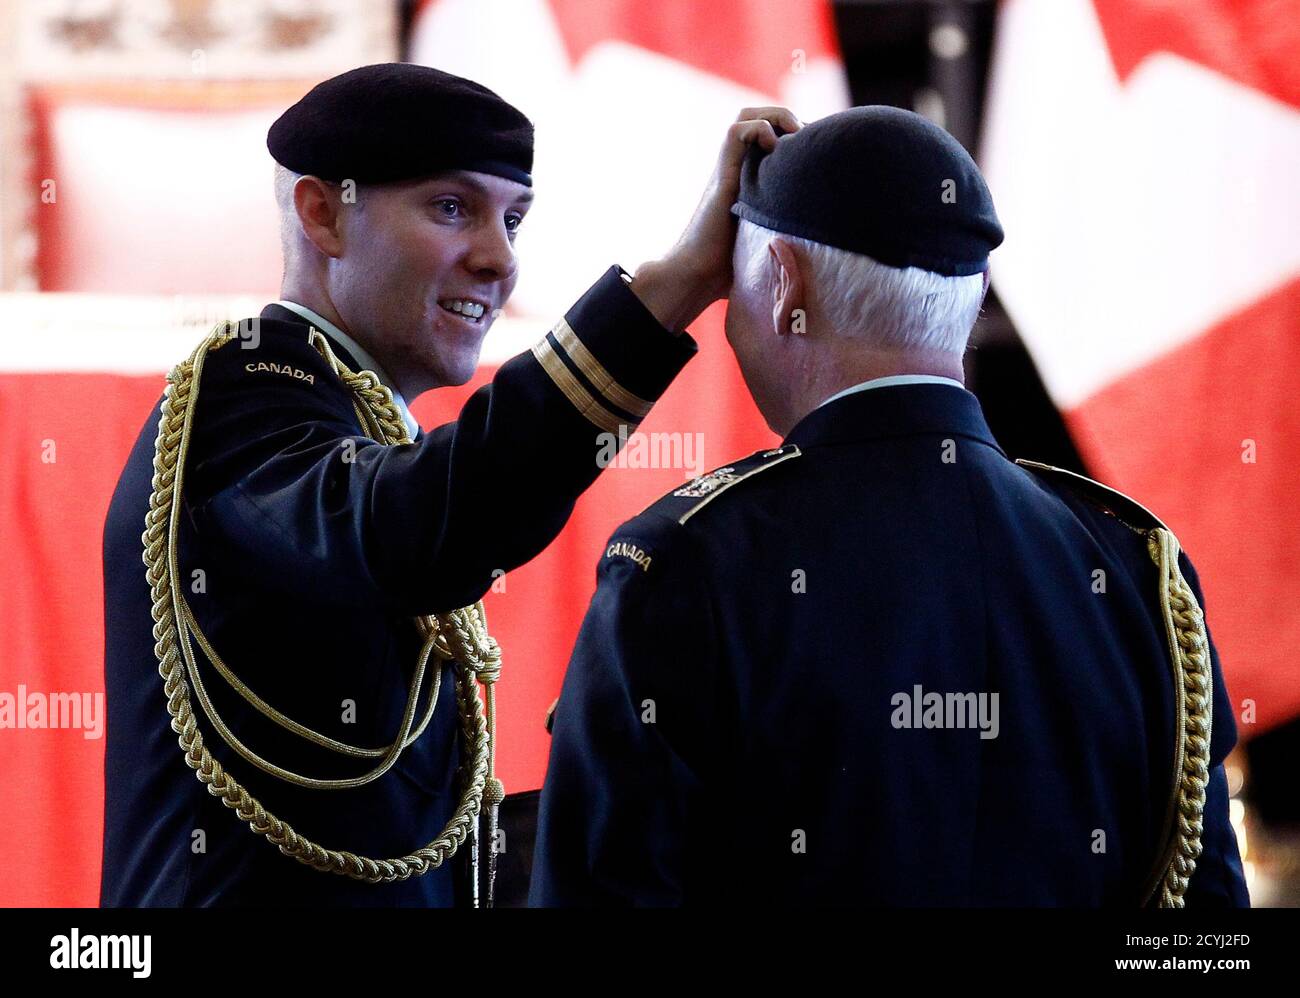 An aide-de-camp adjusts the Governor General David Johnston's headdress  during a Canadian Forces change of command ceremony at the Canadian War  Museum in Ottawa October 29, 2012. REUTERS/Chris Wattie (CANADA - Tags: